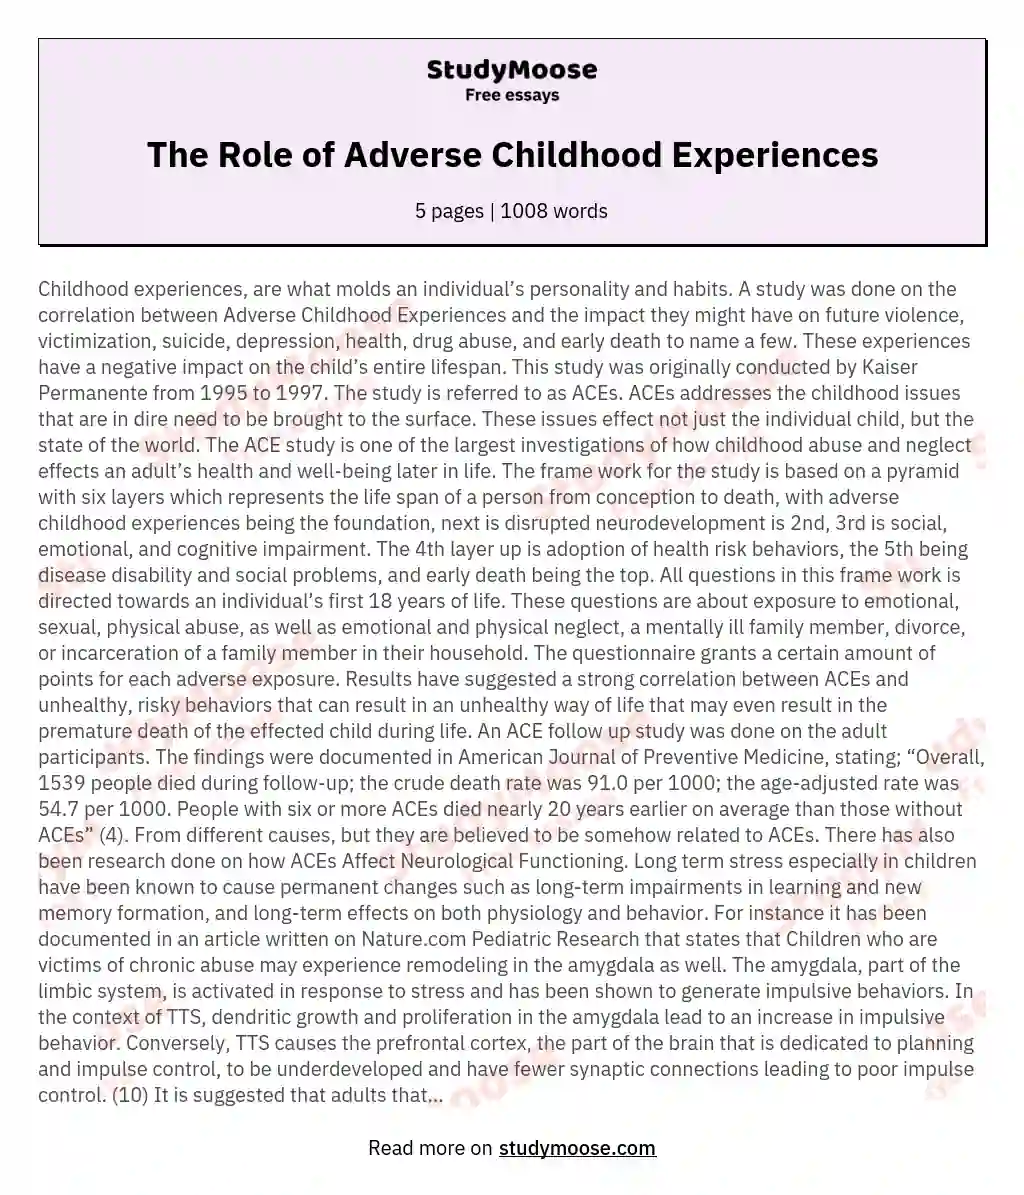 The Role of Adverse Childhood Experiences essay